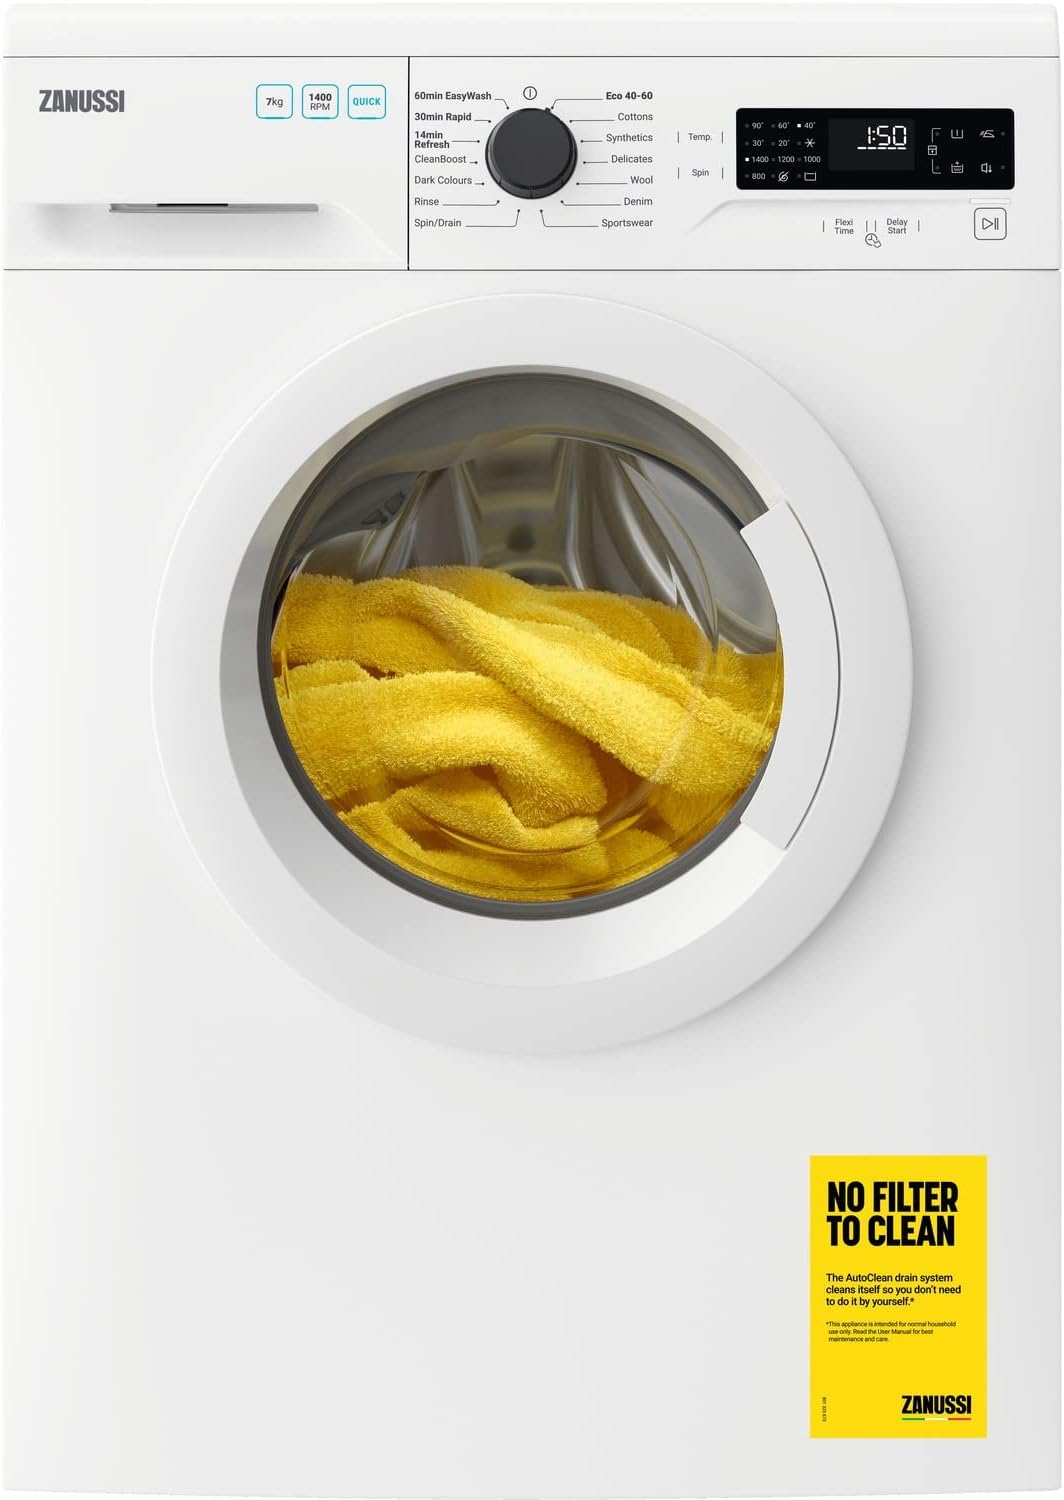 Zanussi ZWF942E3PW Washing Machine, 9 kg Load, 1400rpm Spin, AutoAdjust Function, Energy Saving Eco - Cycles, CleanBoost Steam Care, Quick Wash, FlexiTime, White - Amazing Gadgets Outlet